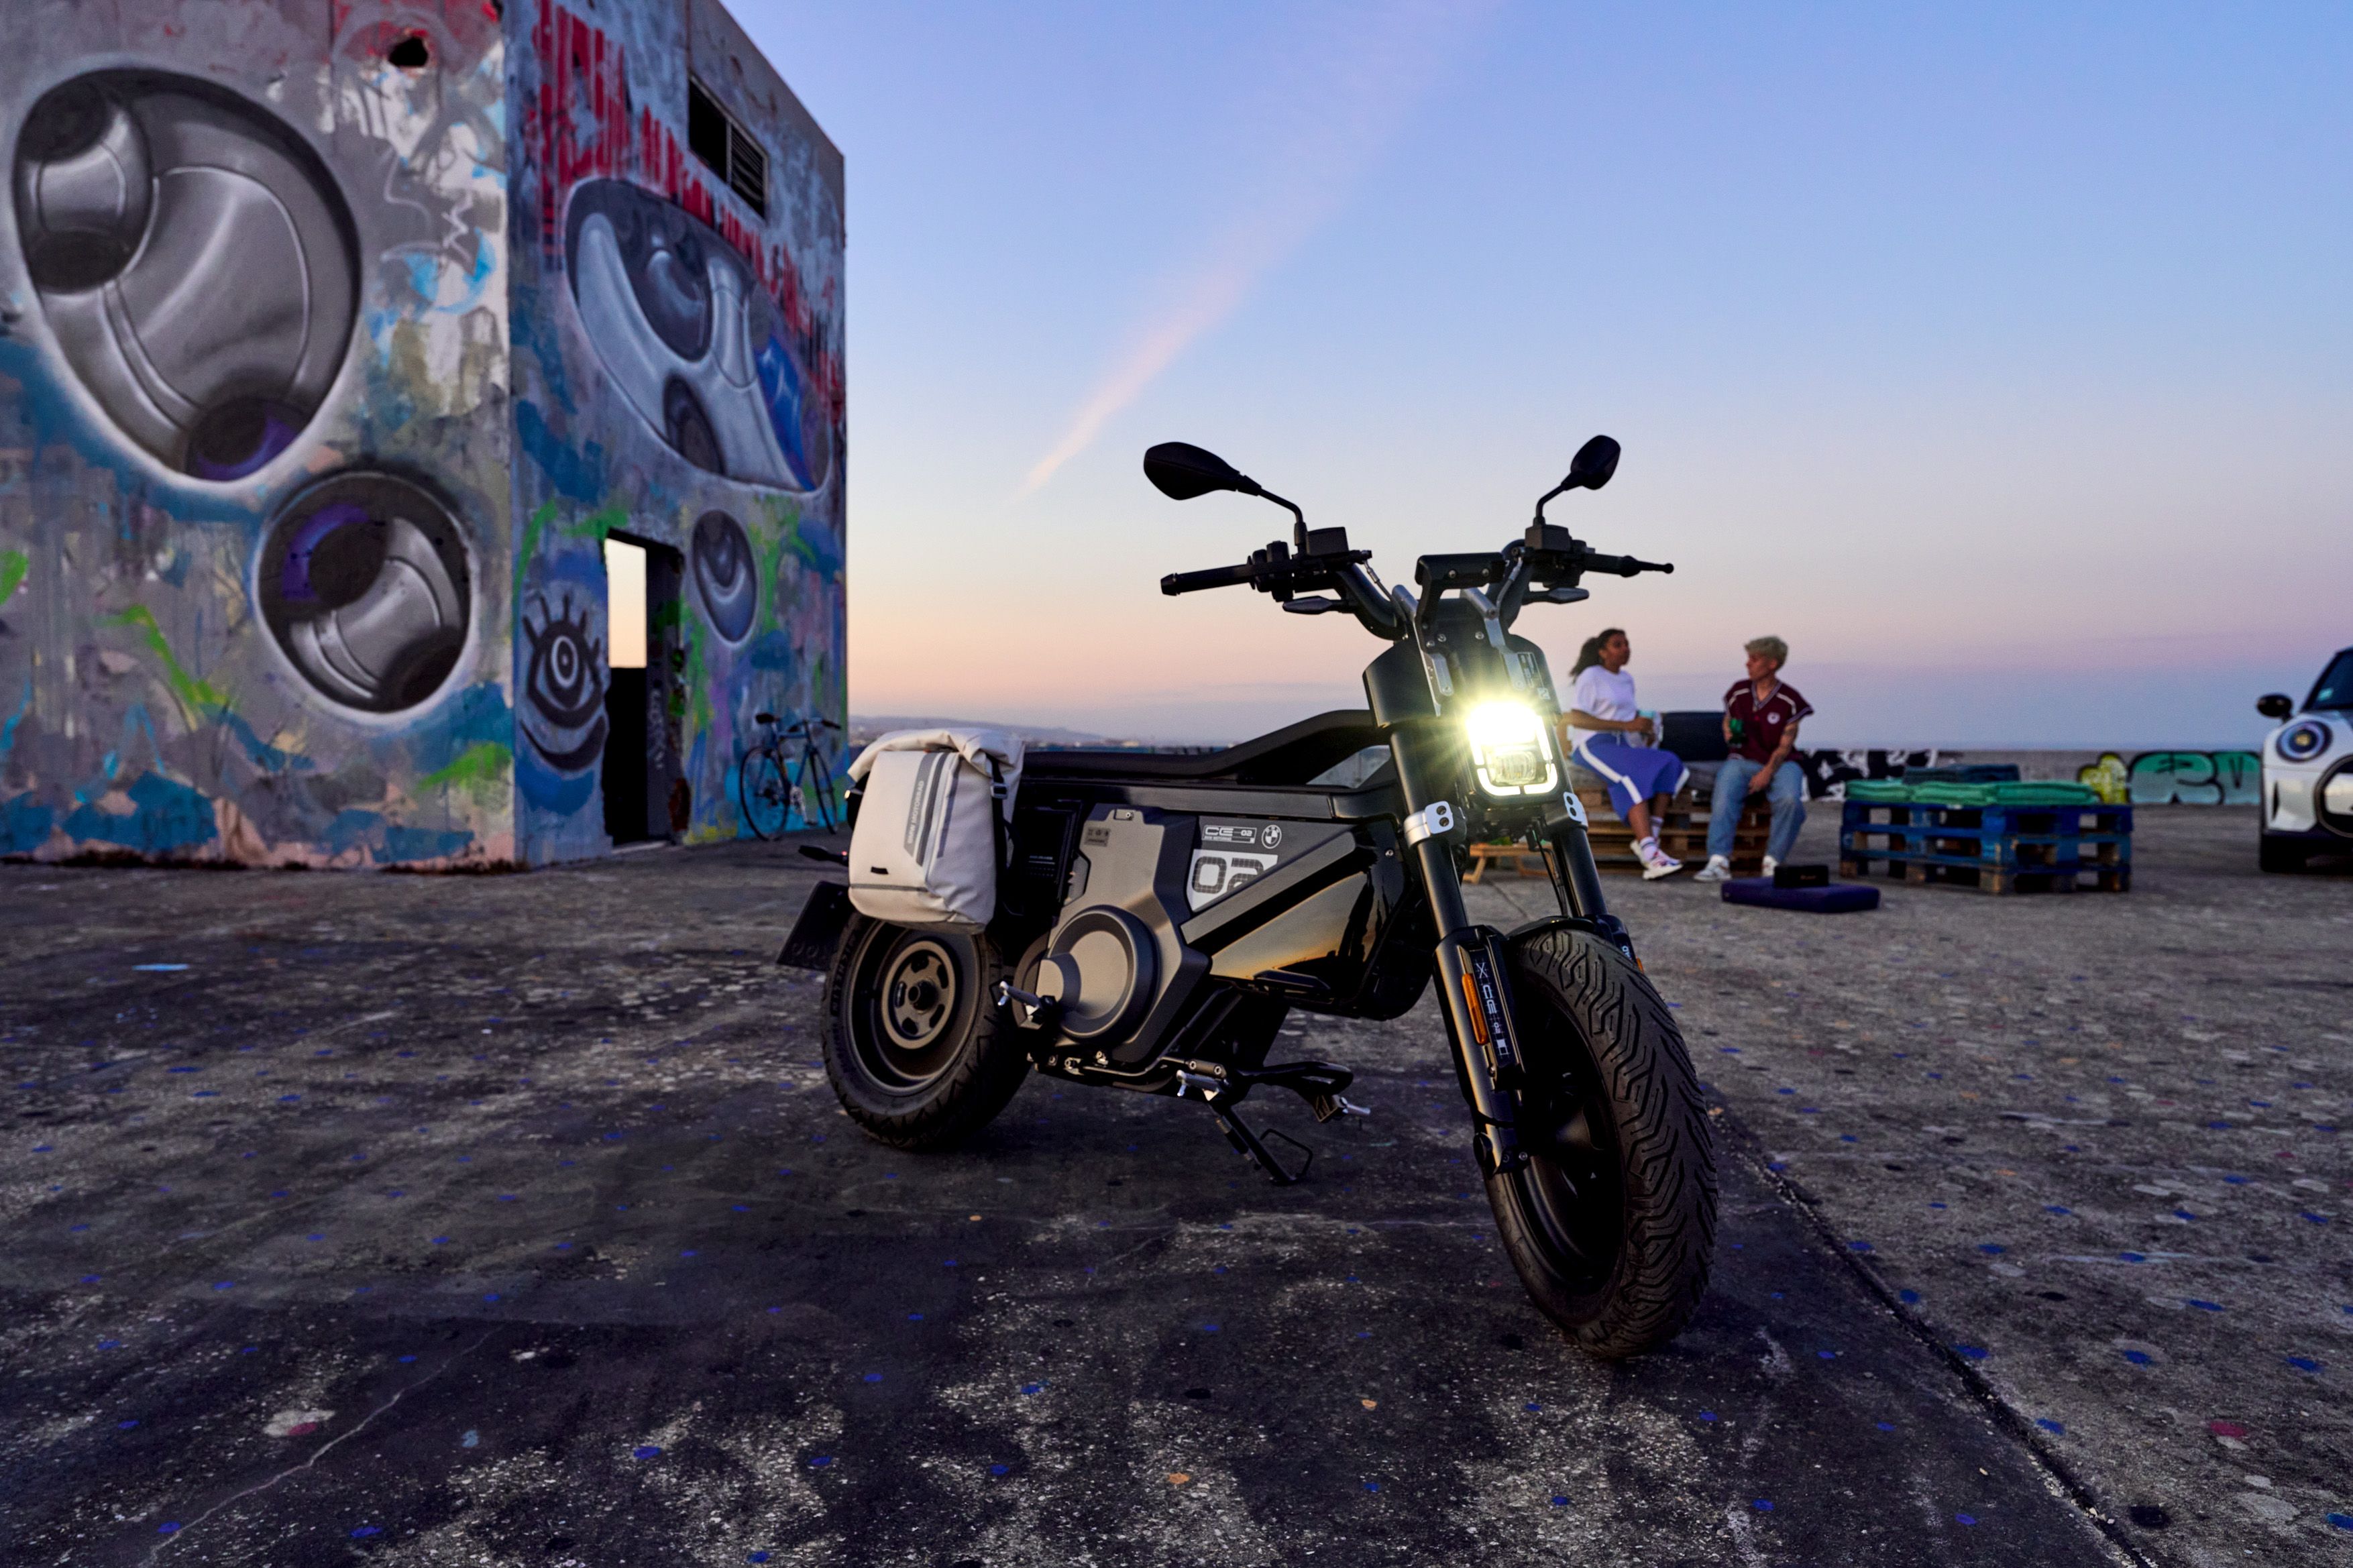 BMW CE 02 Is a Rad Little E-Motorbike for the City